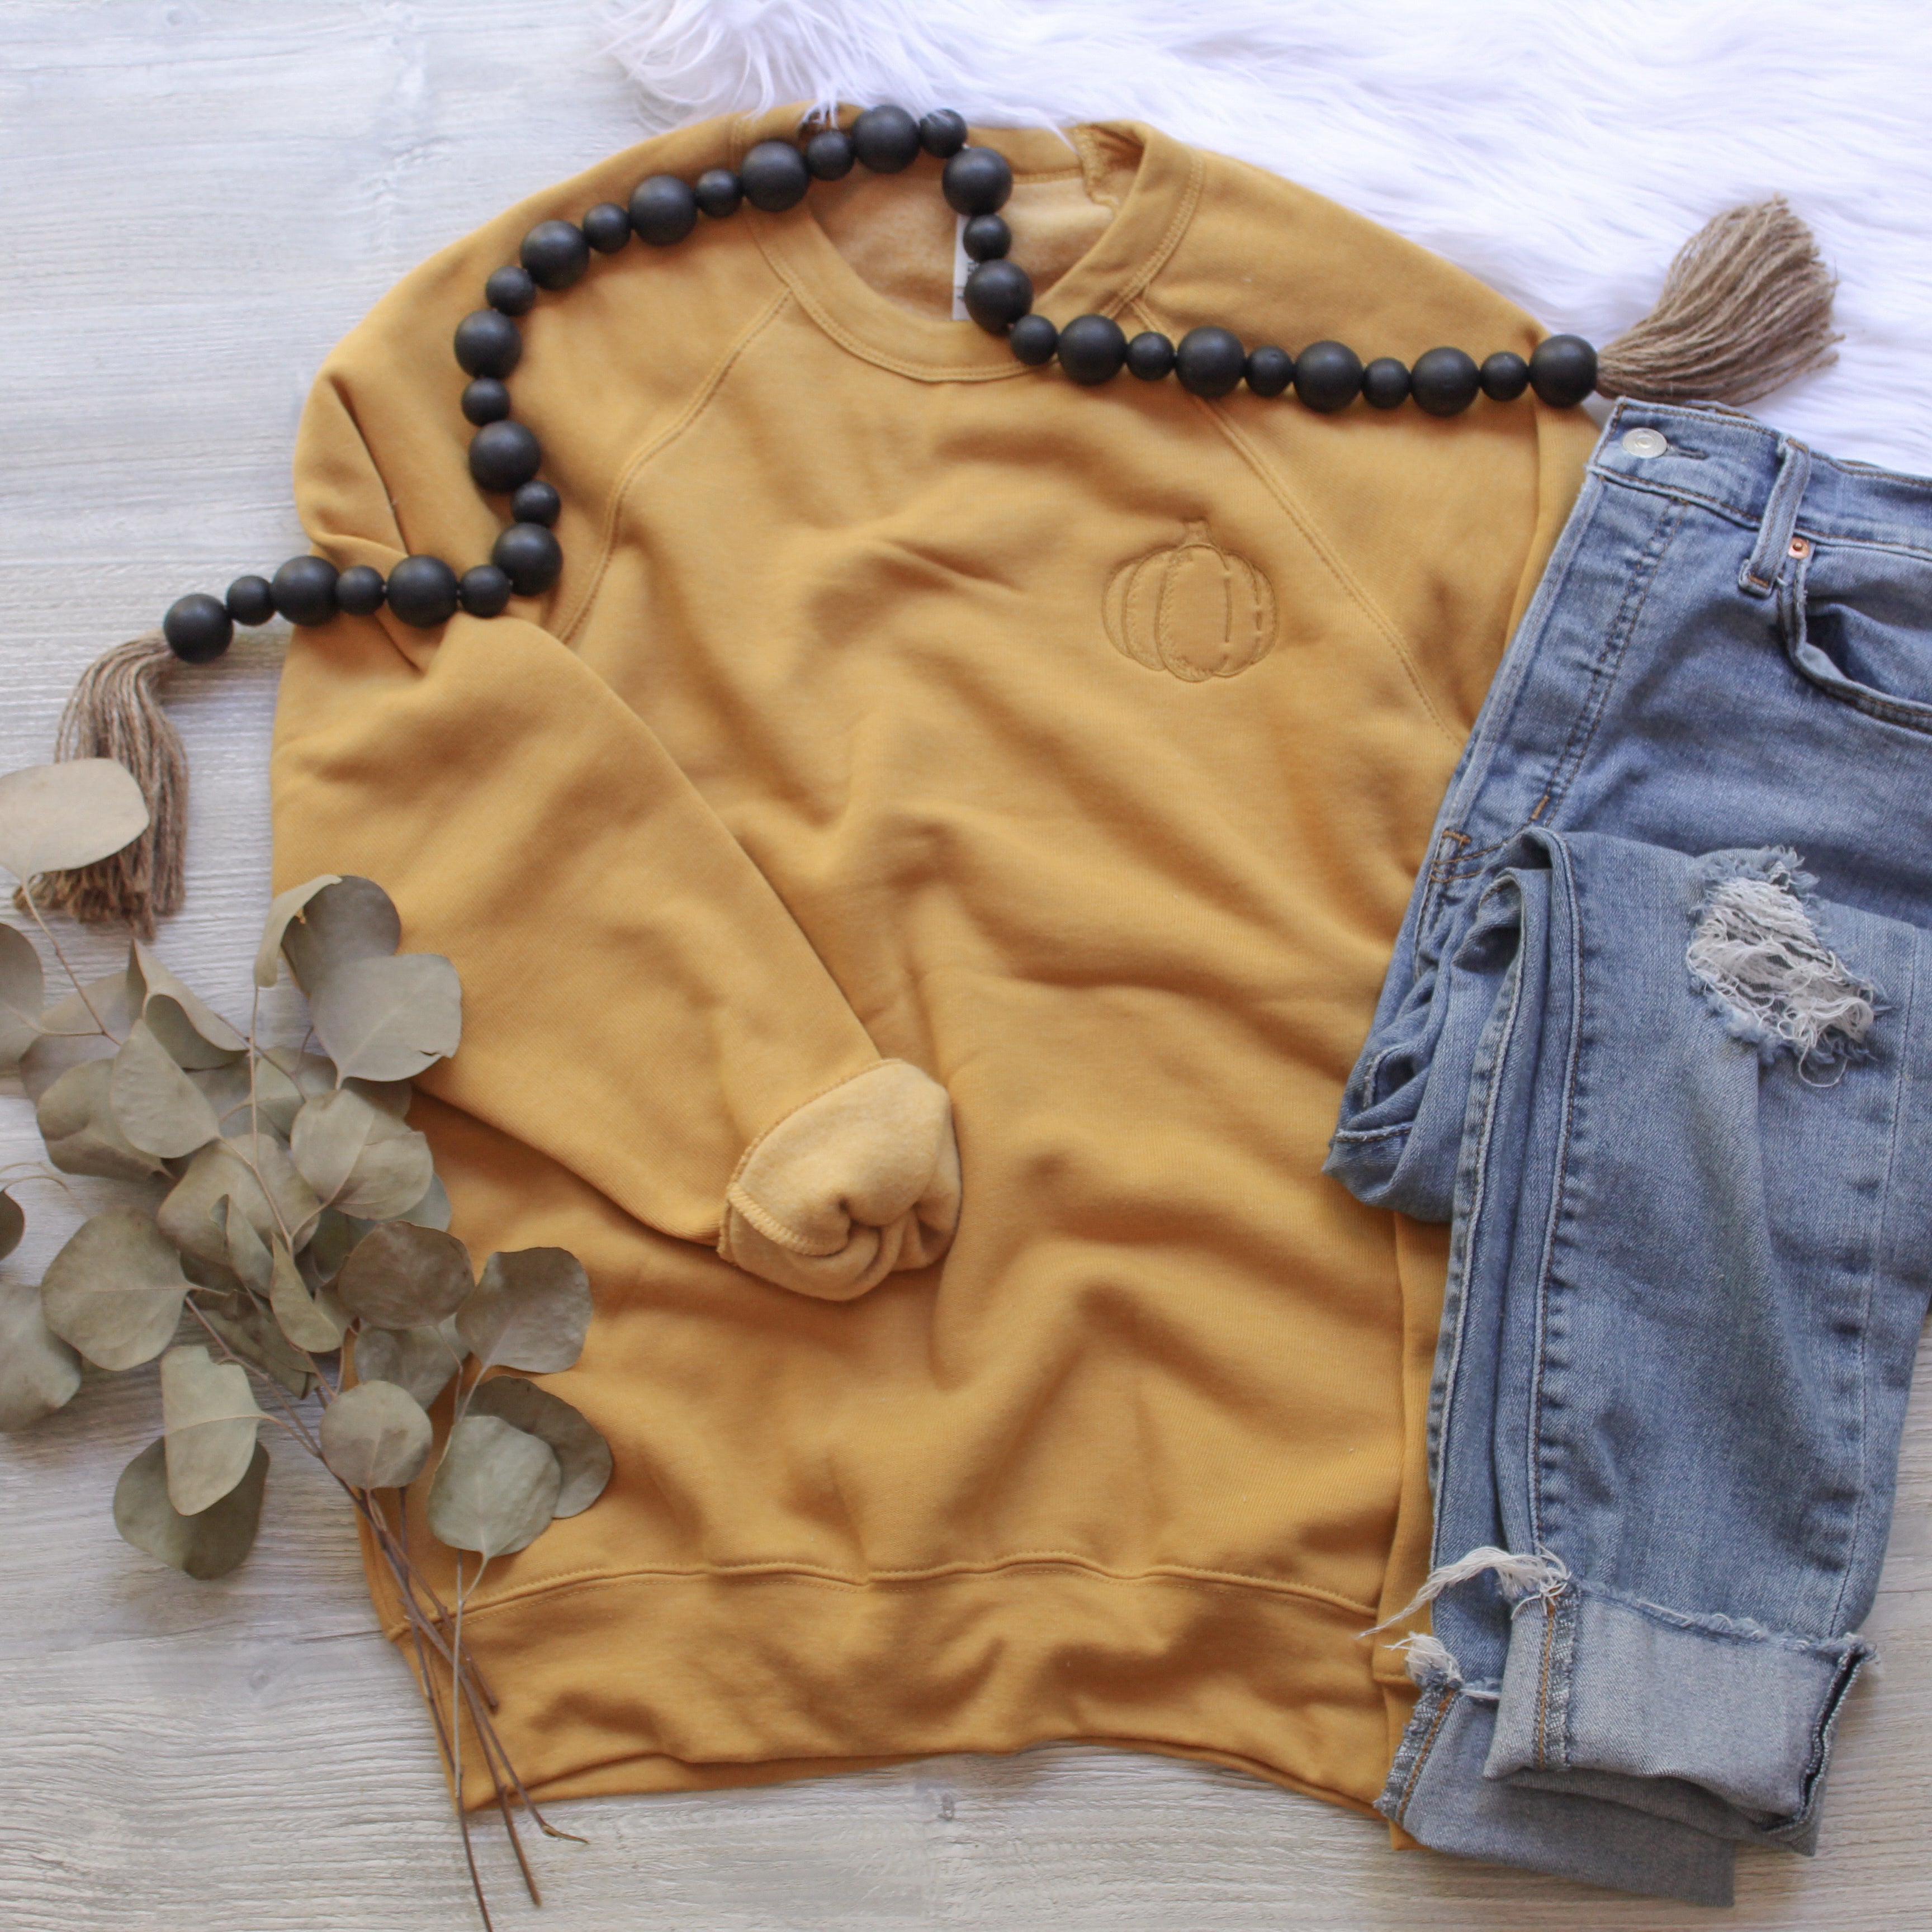 Mustard gold crewneck that has a small pumpkin embroidered on it